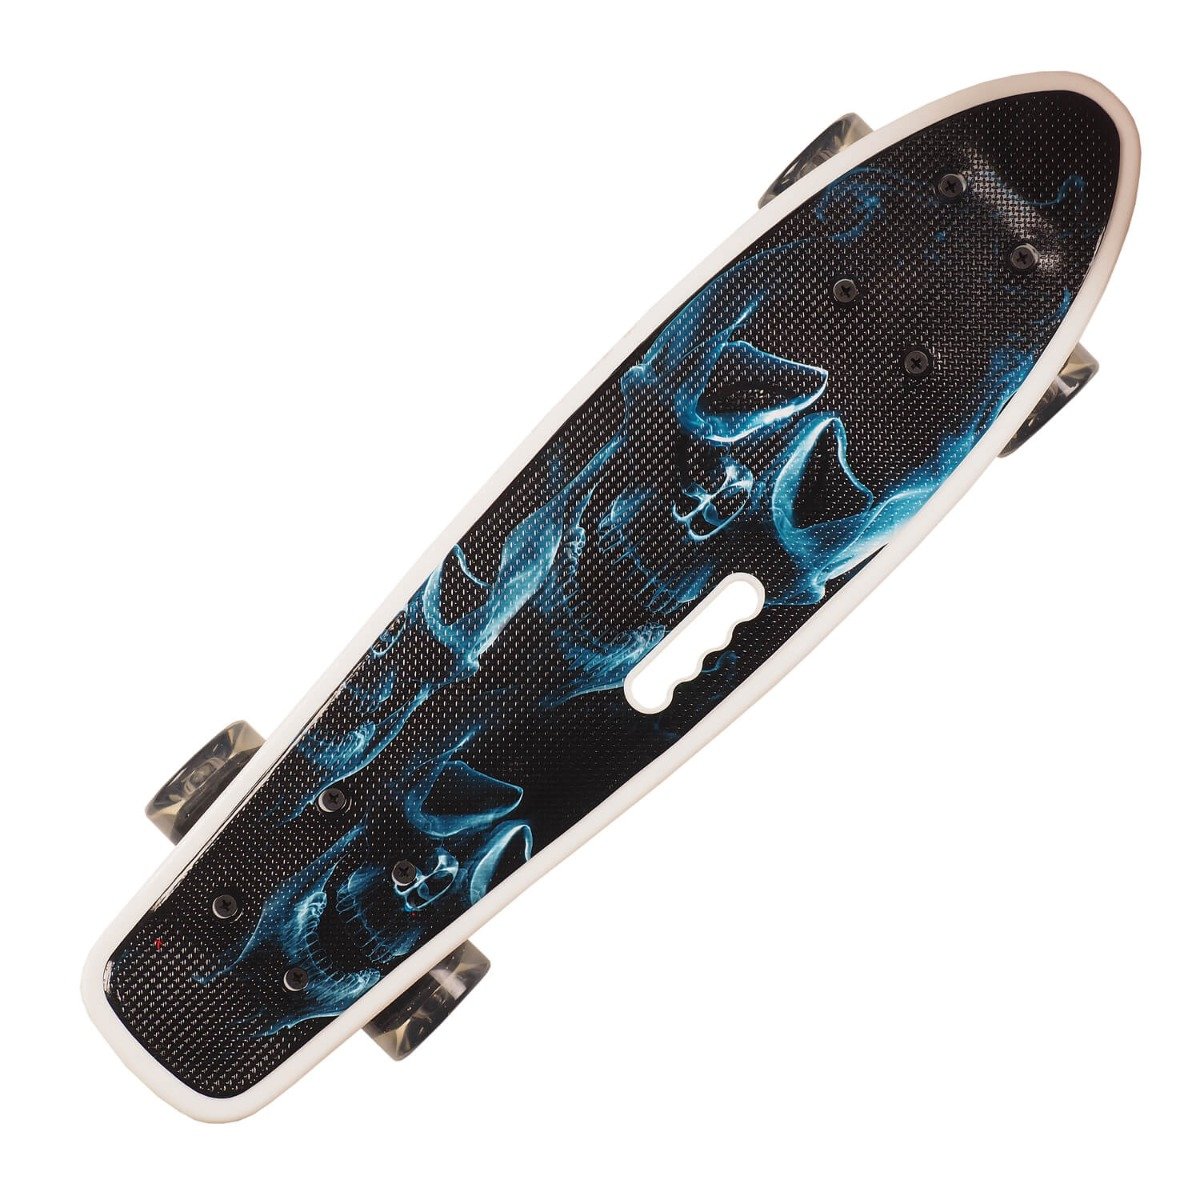 Penny board portabil Action One, Smoke, 22 inch Action One